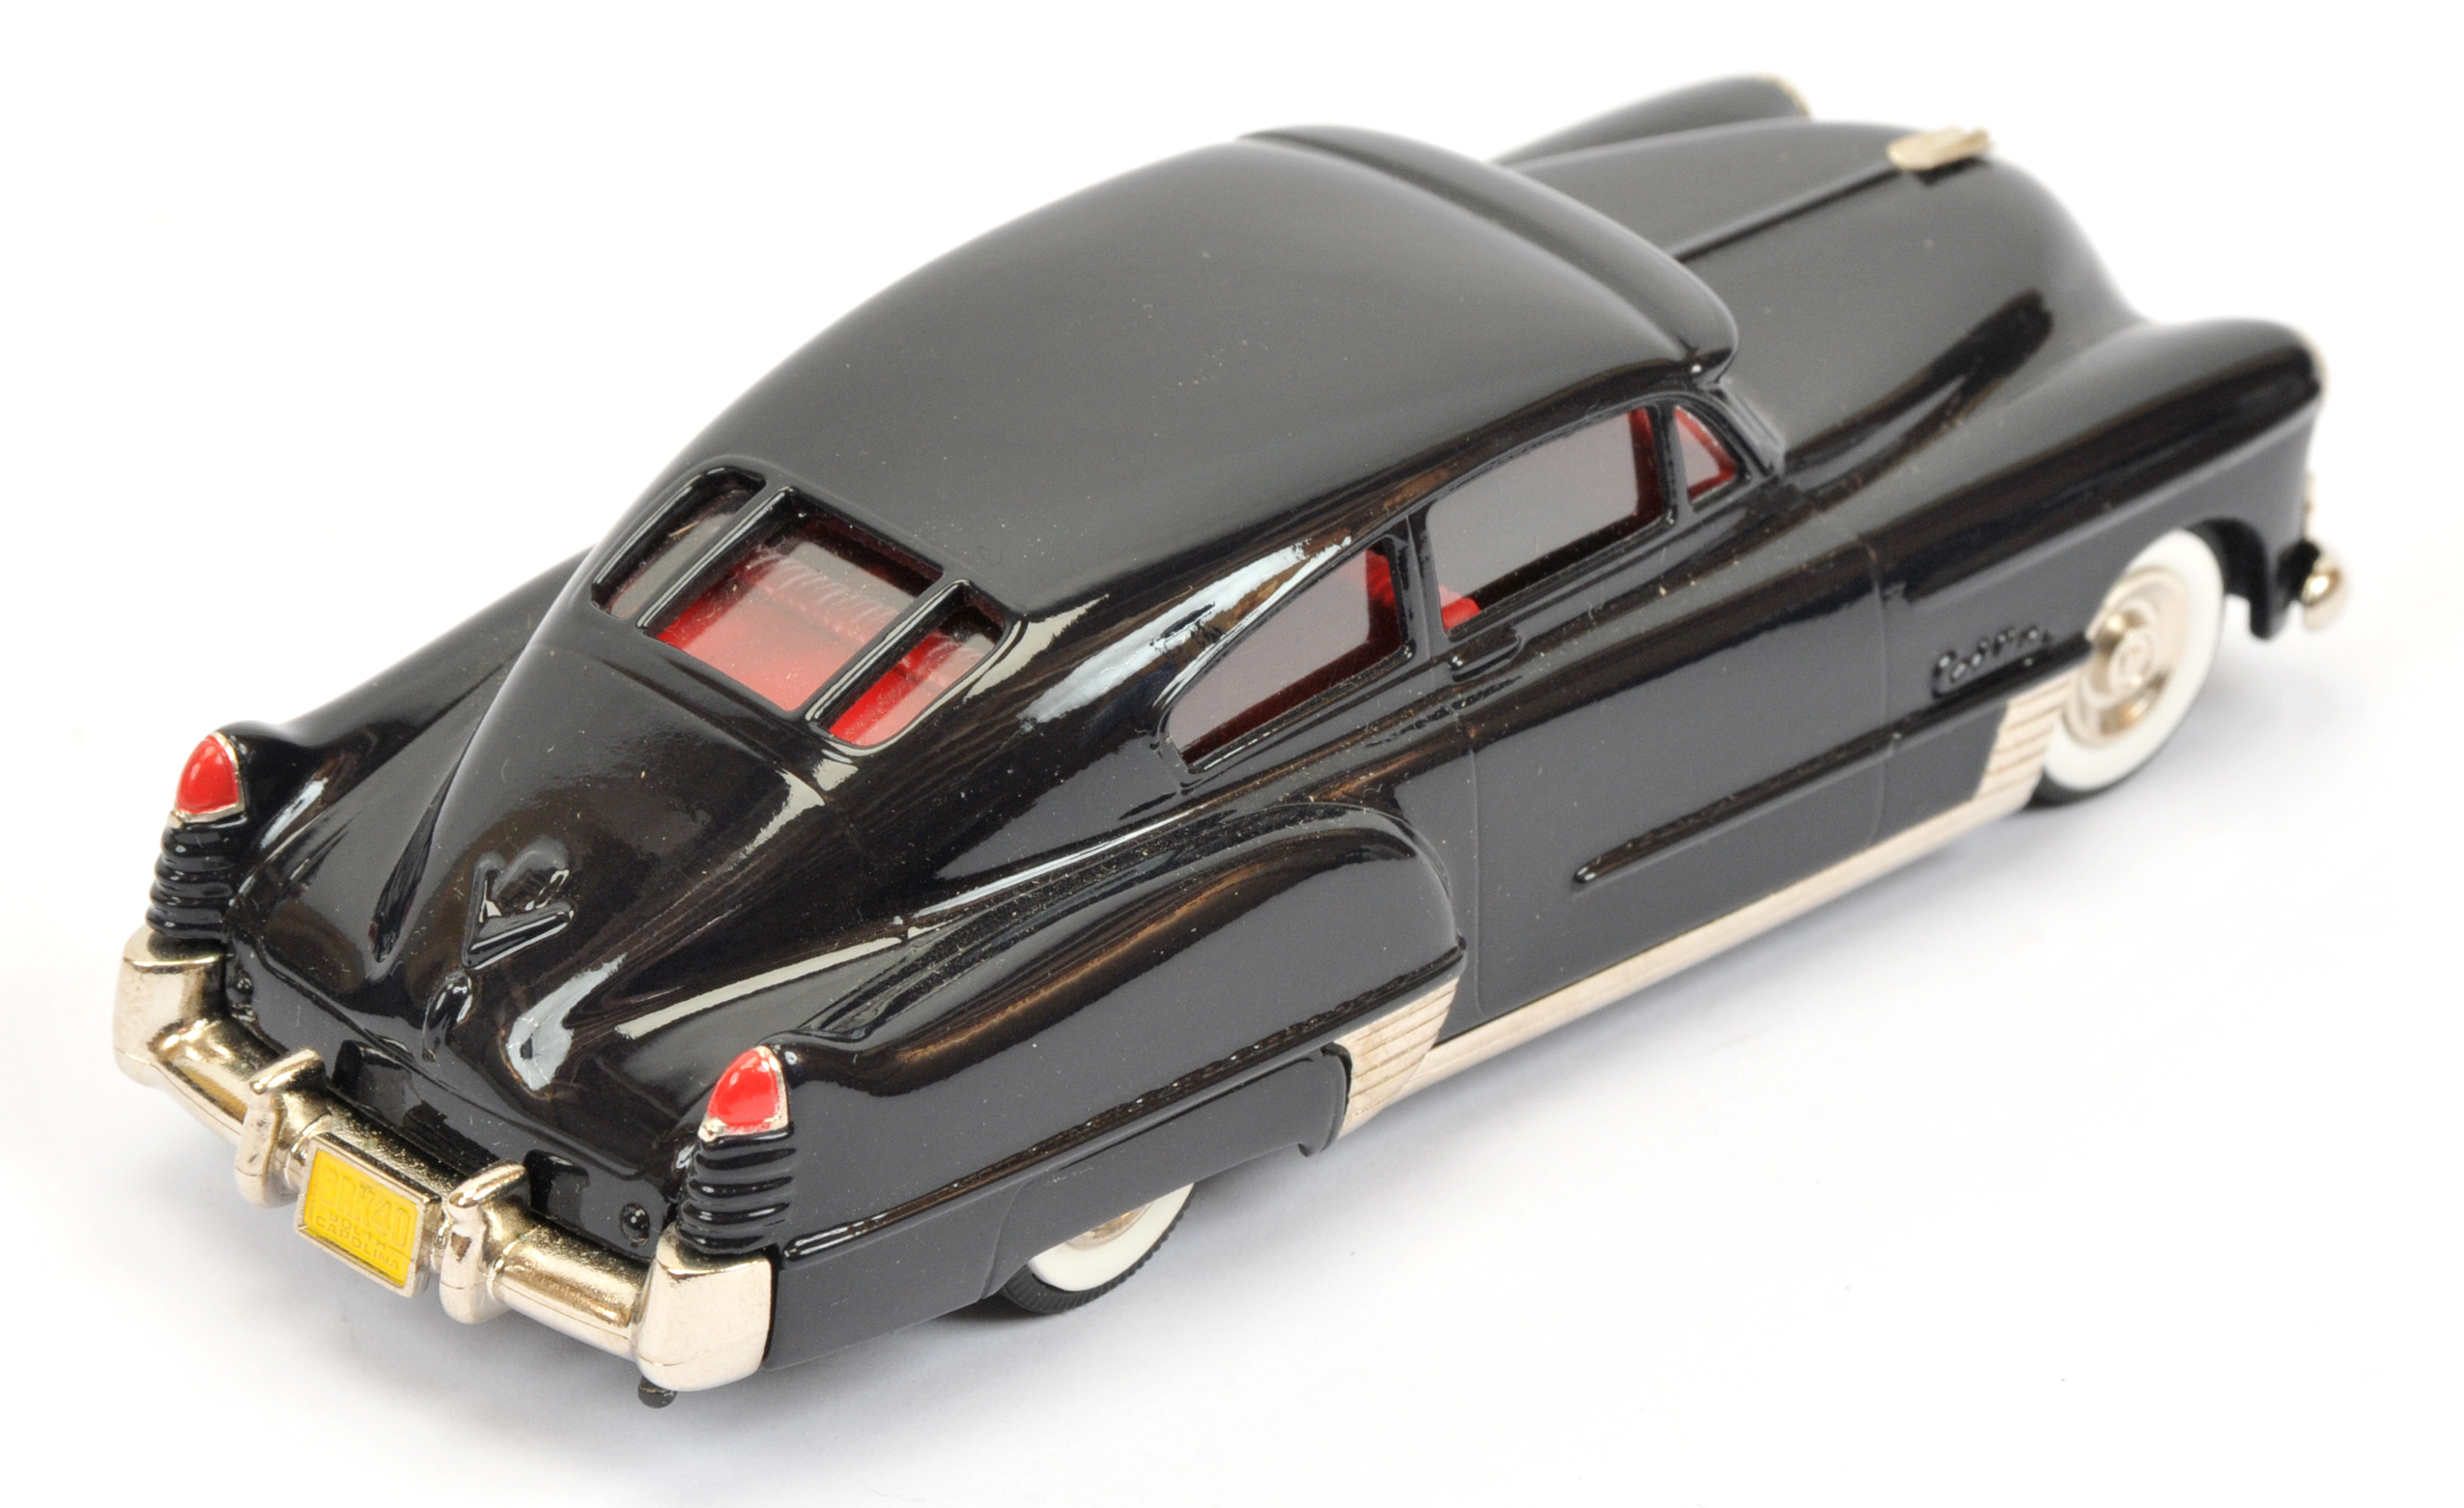 Brooklin BRK40 1948 Cadillac Dynamic Fast black coupe - Image 2 of 2